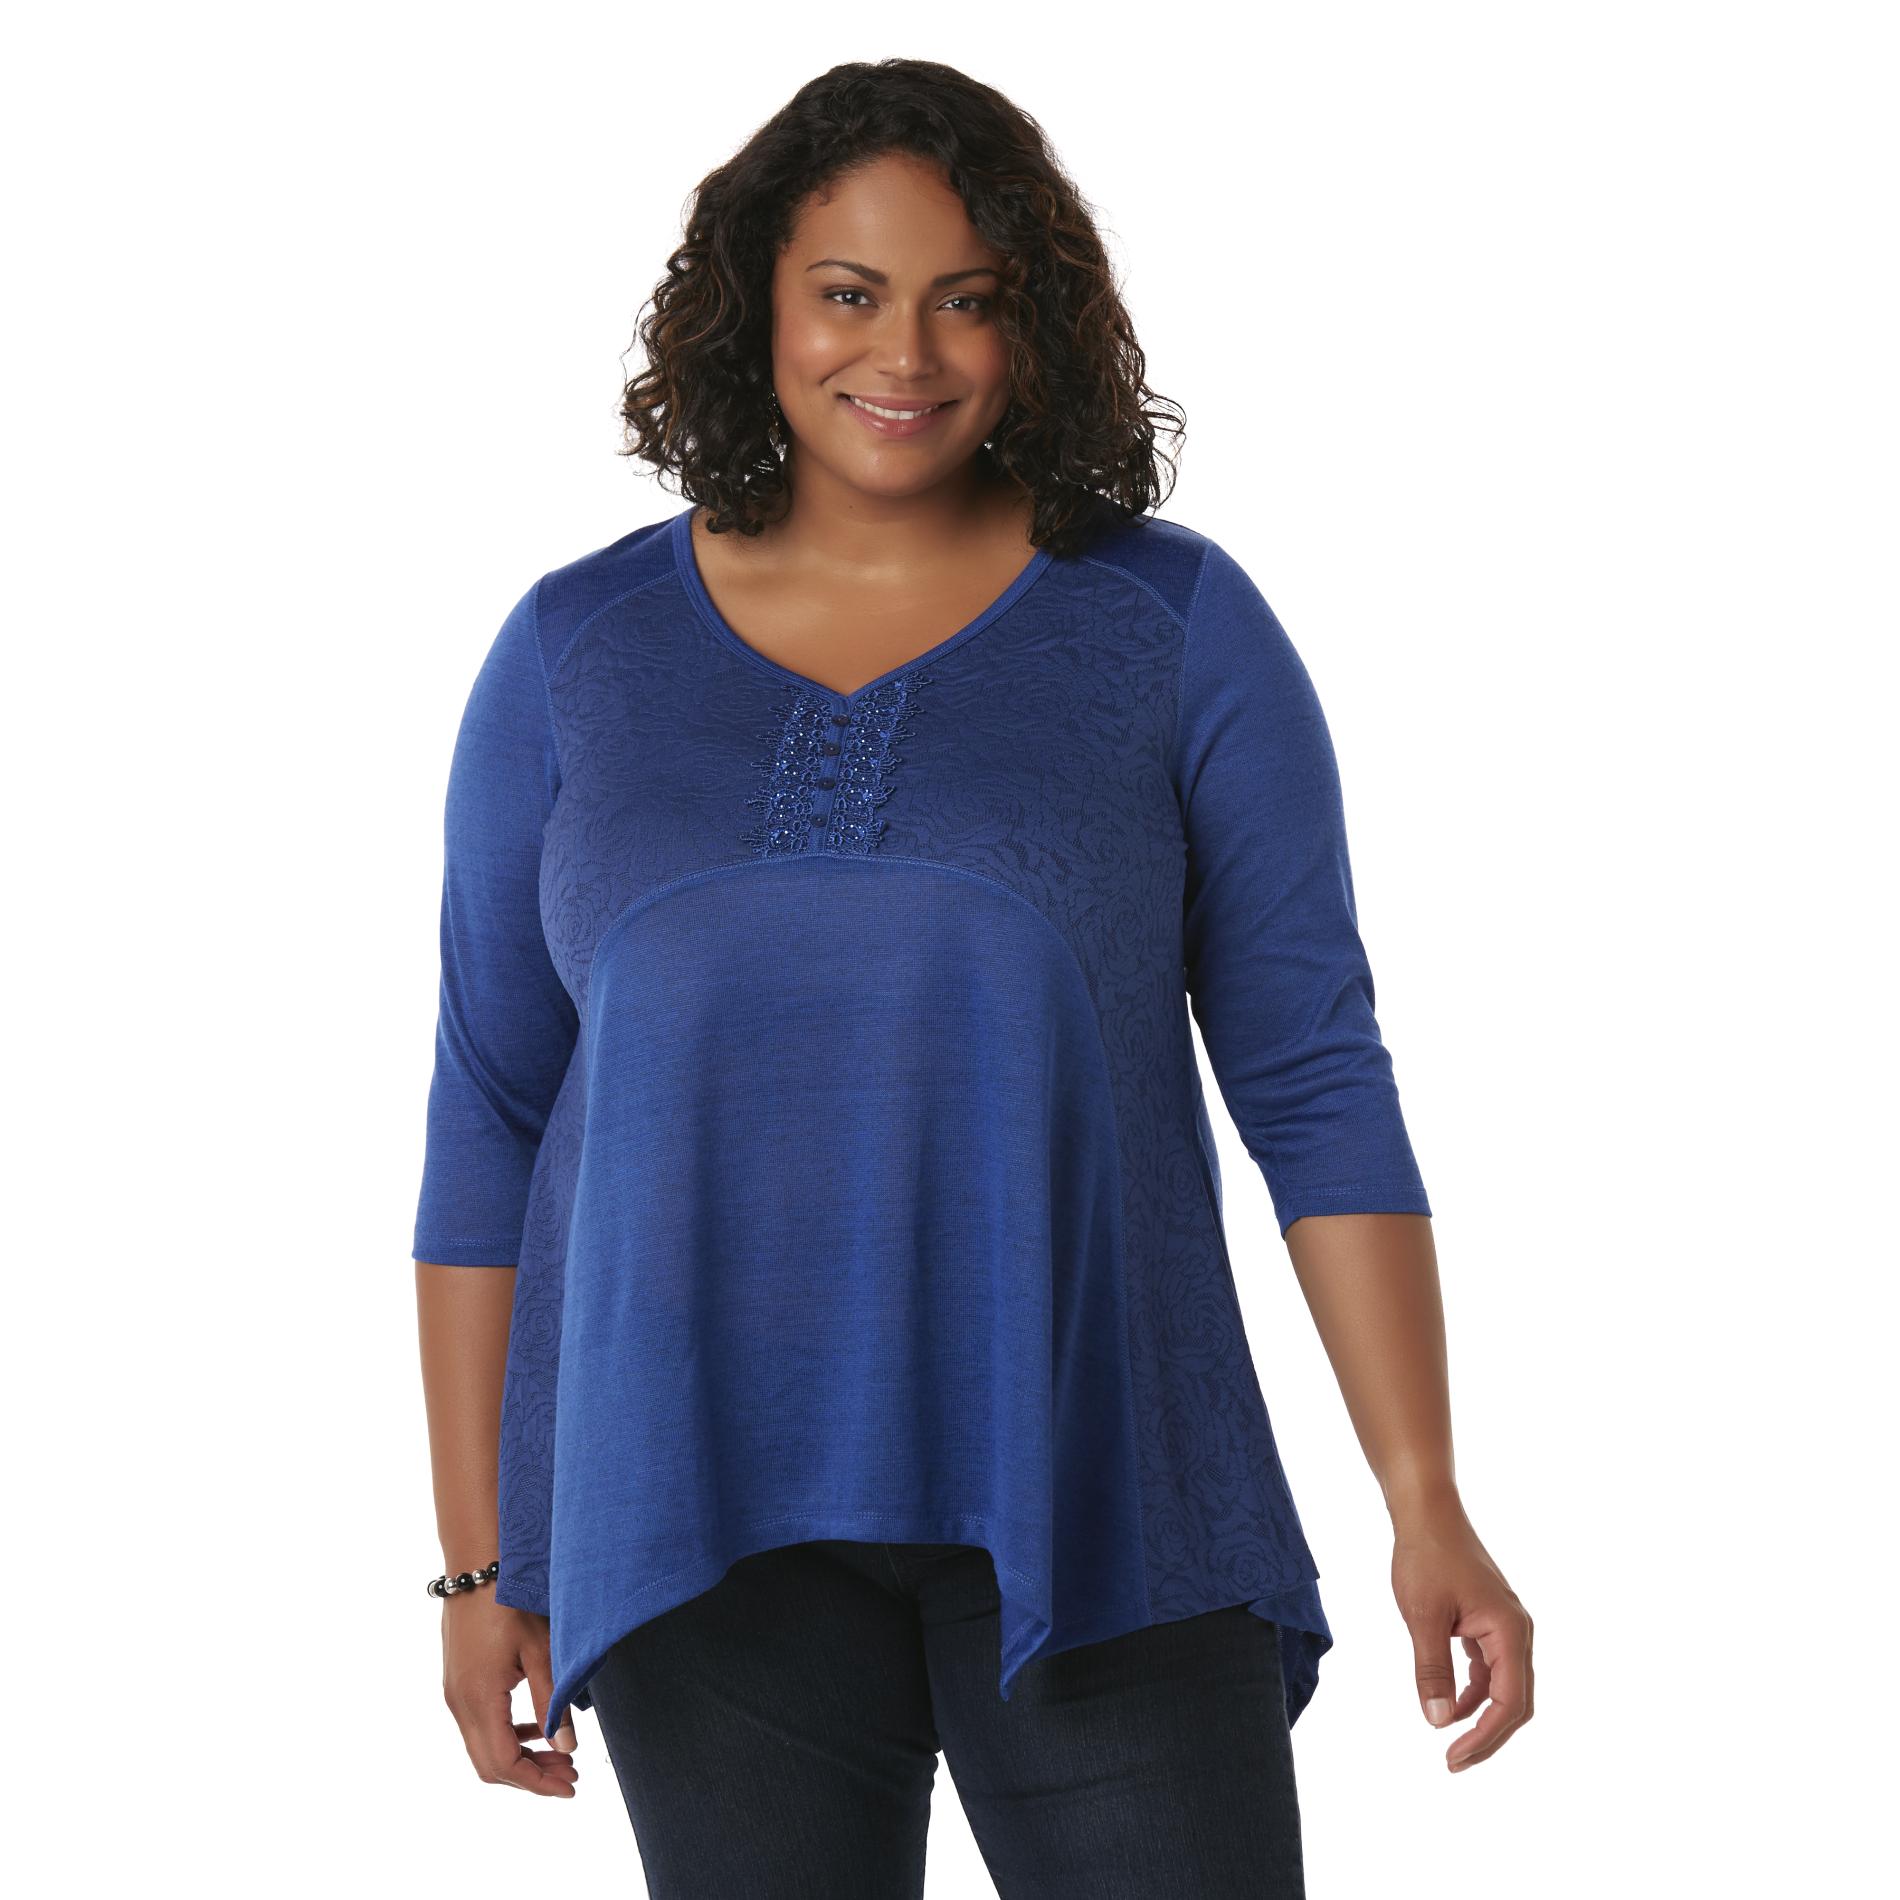 Live and Let Live Women's Plus Semisheer Top